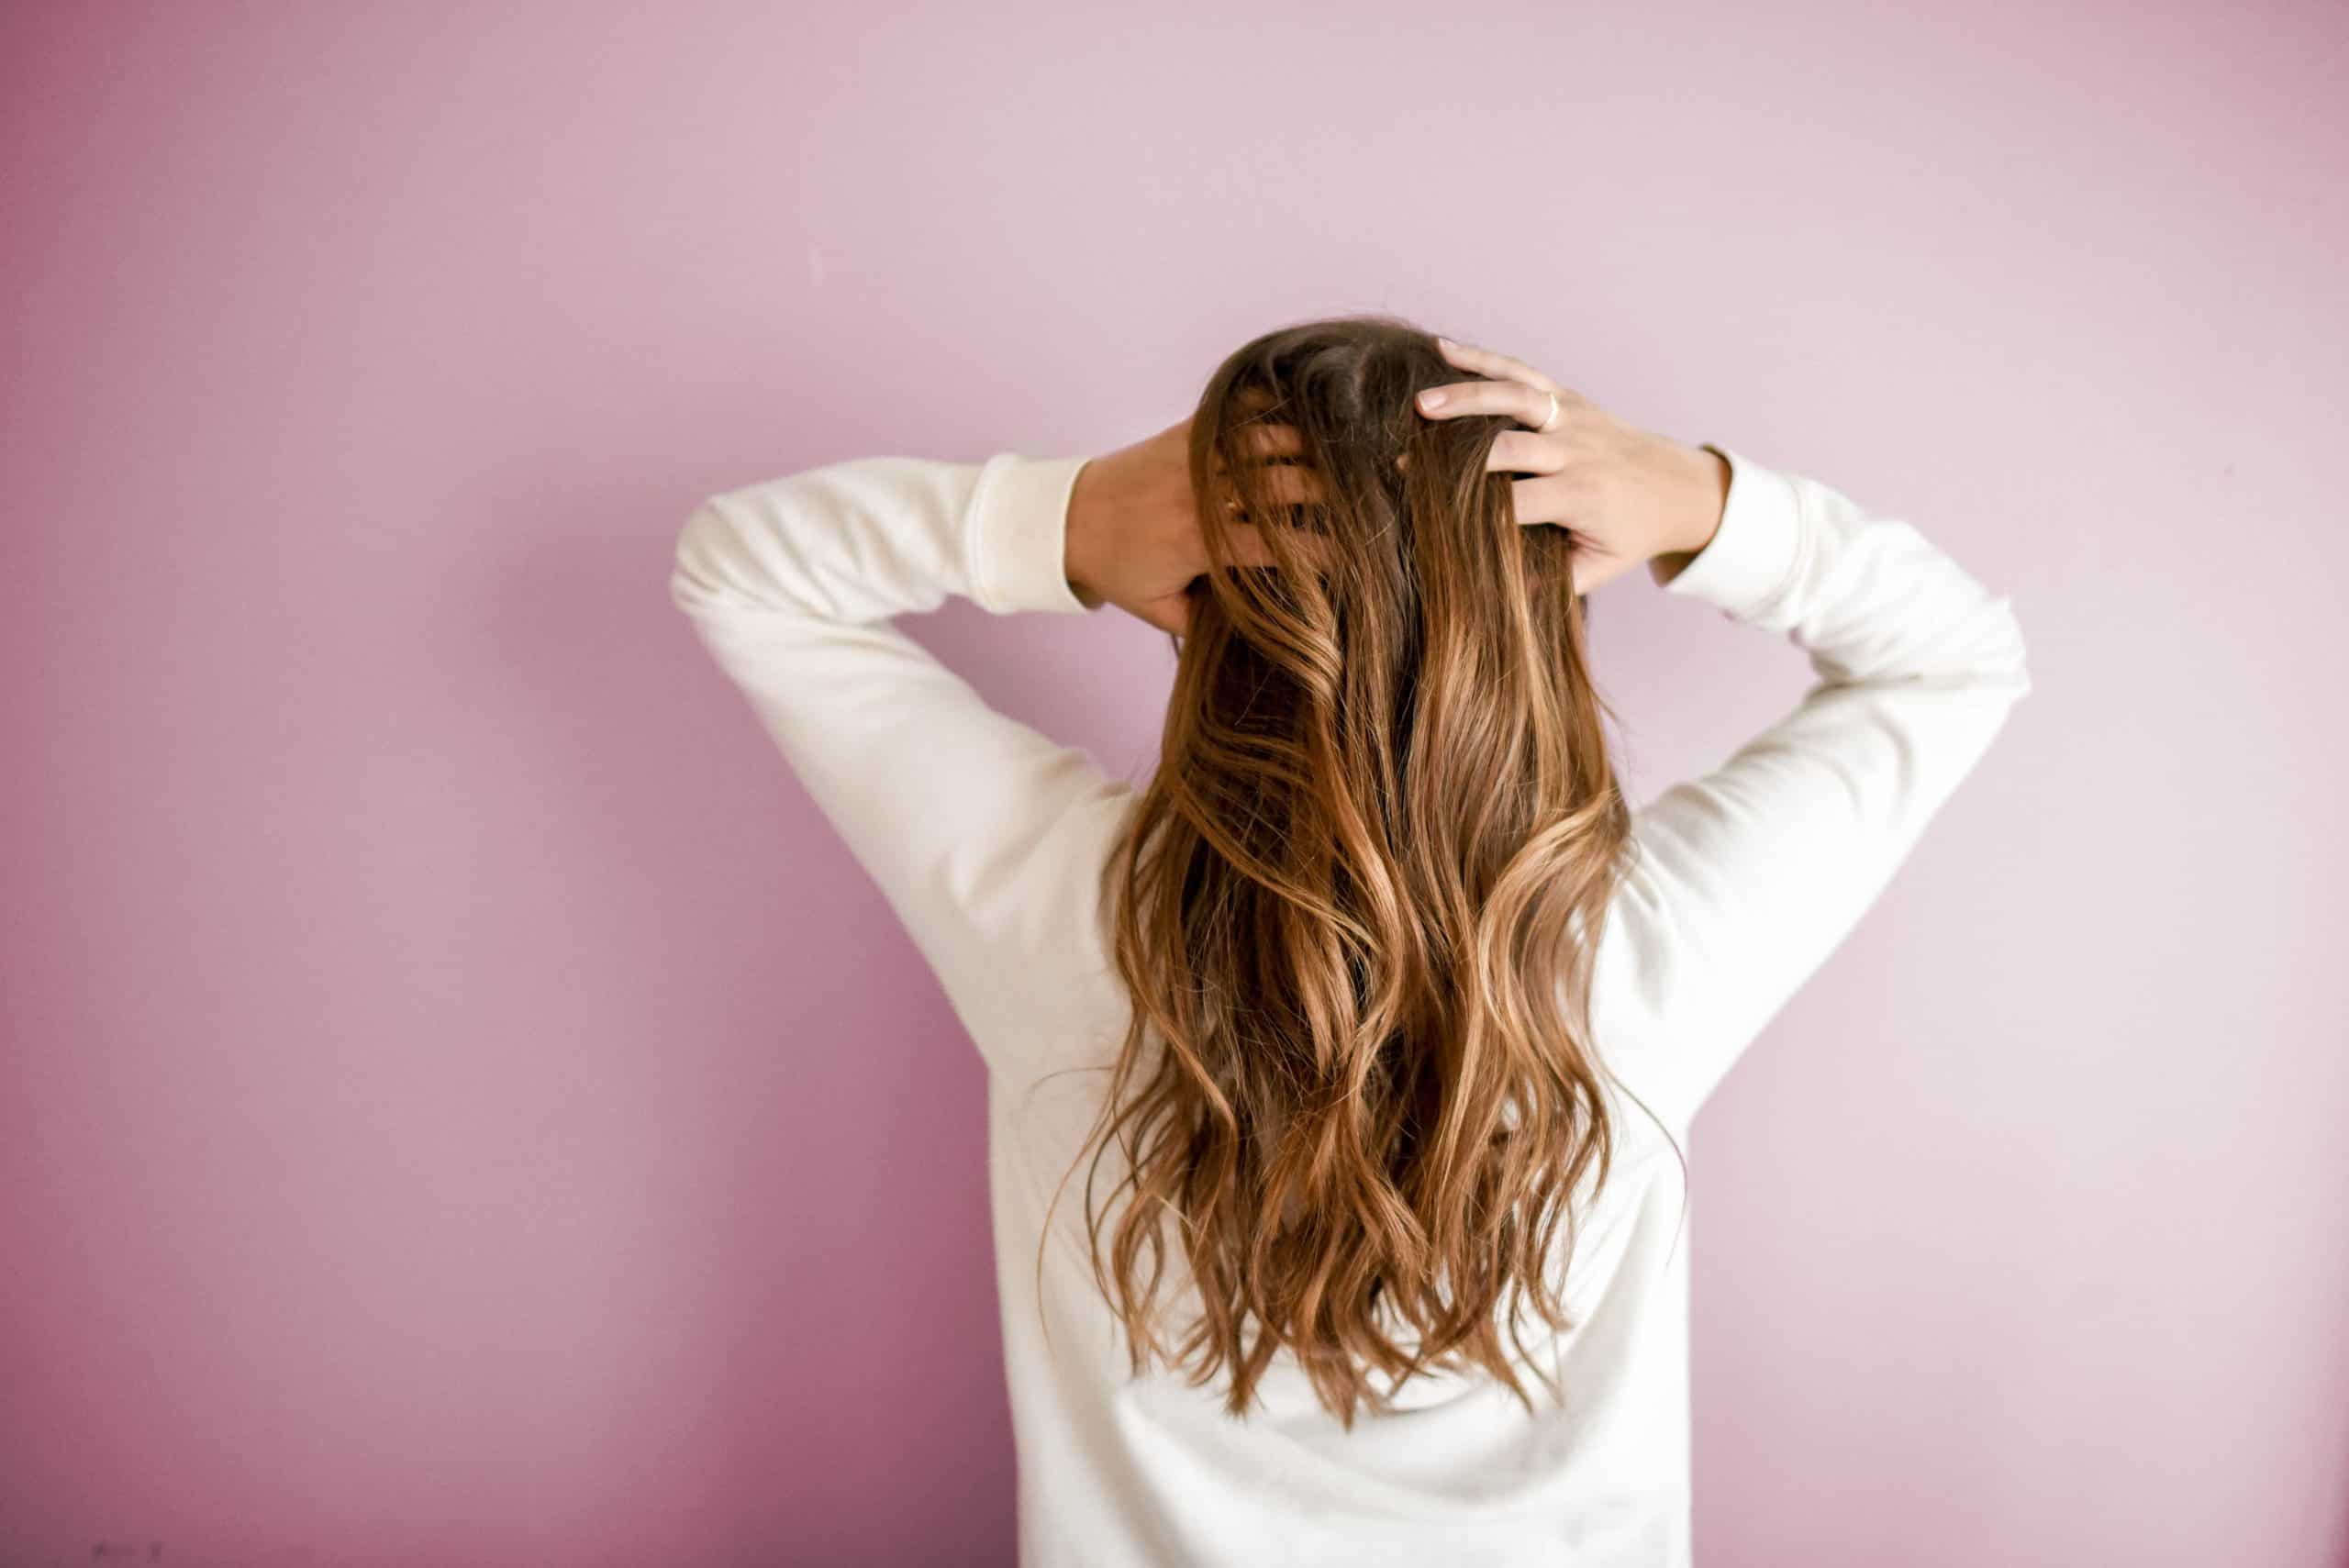 Hair care tips and tricks